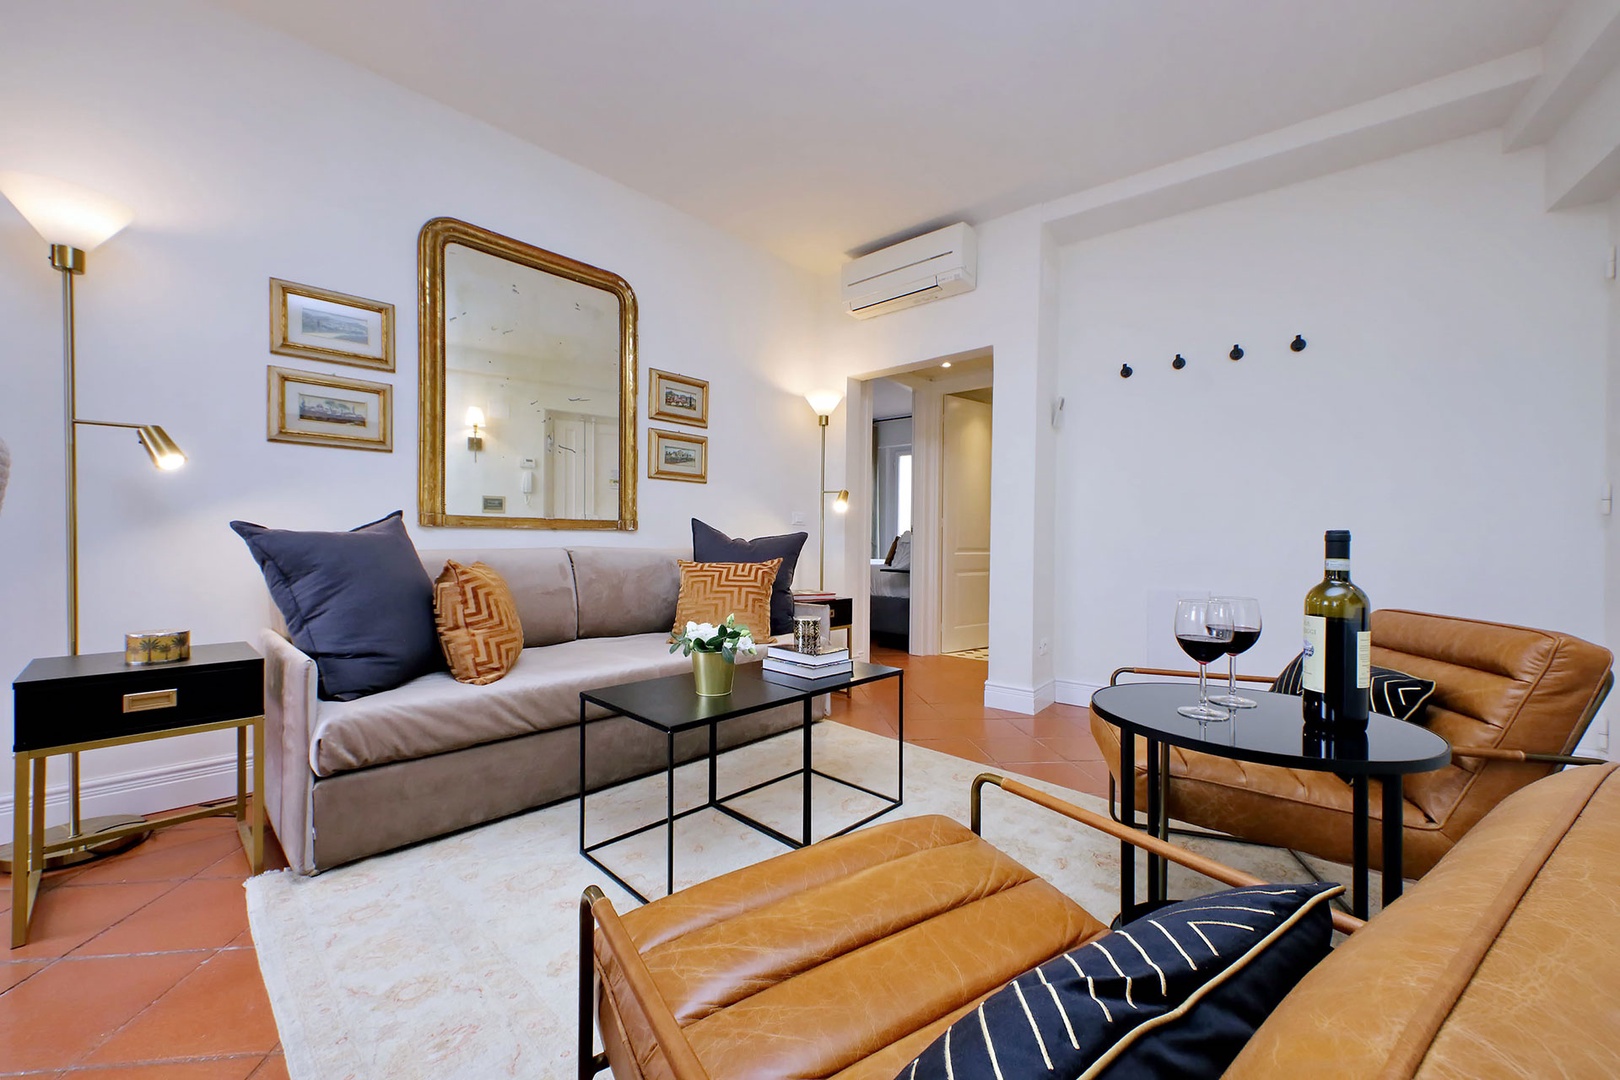 Elegantly decorated the Amore apartment is the perfect home away from home.